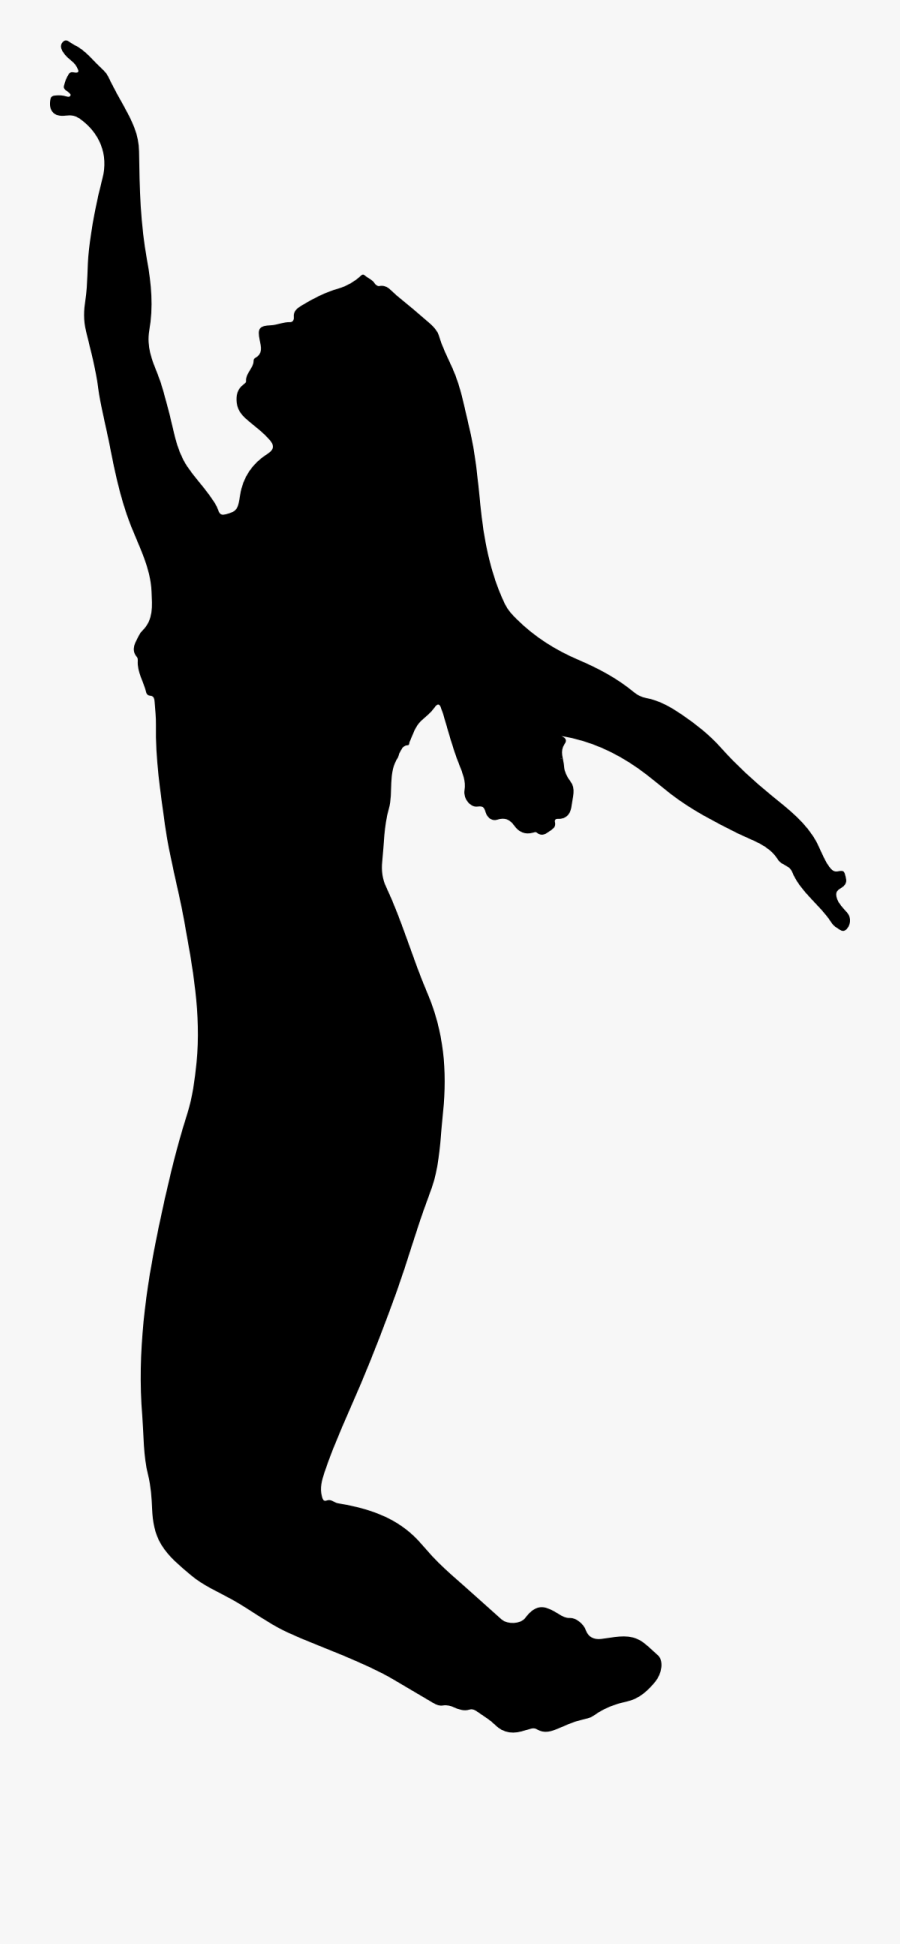 This Free Icons Png Design Of Ballerina Silhouette - Ballet, Transparent Clipart